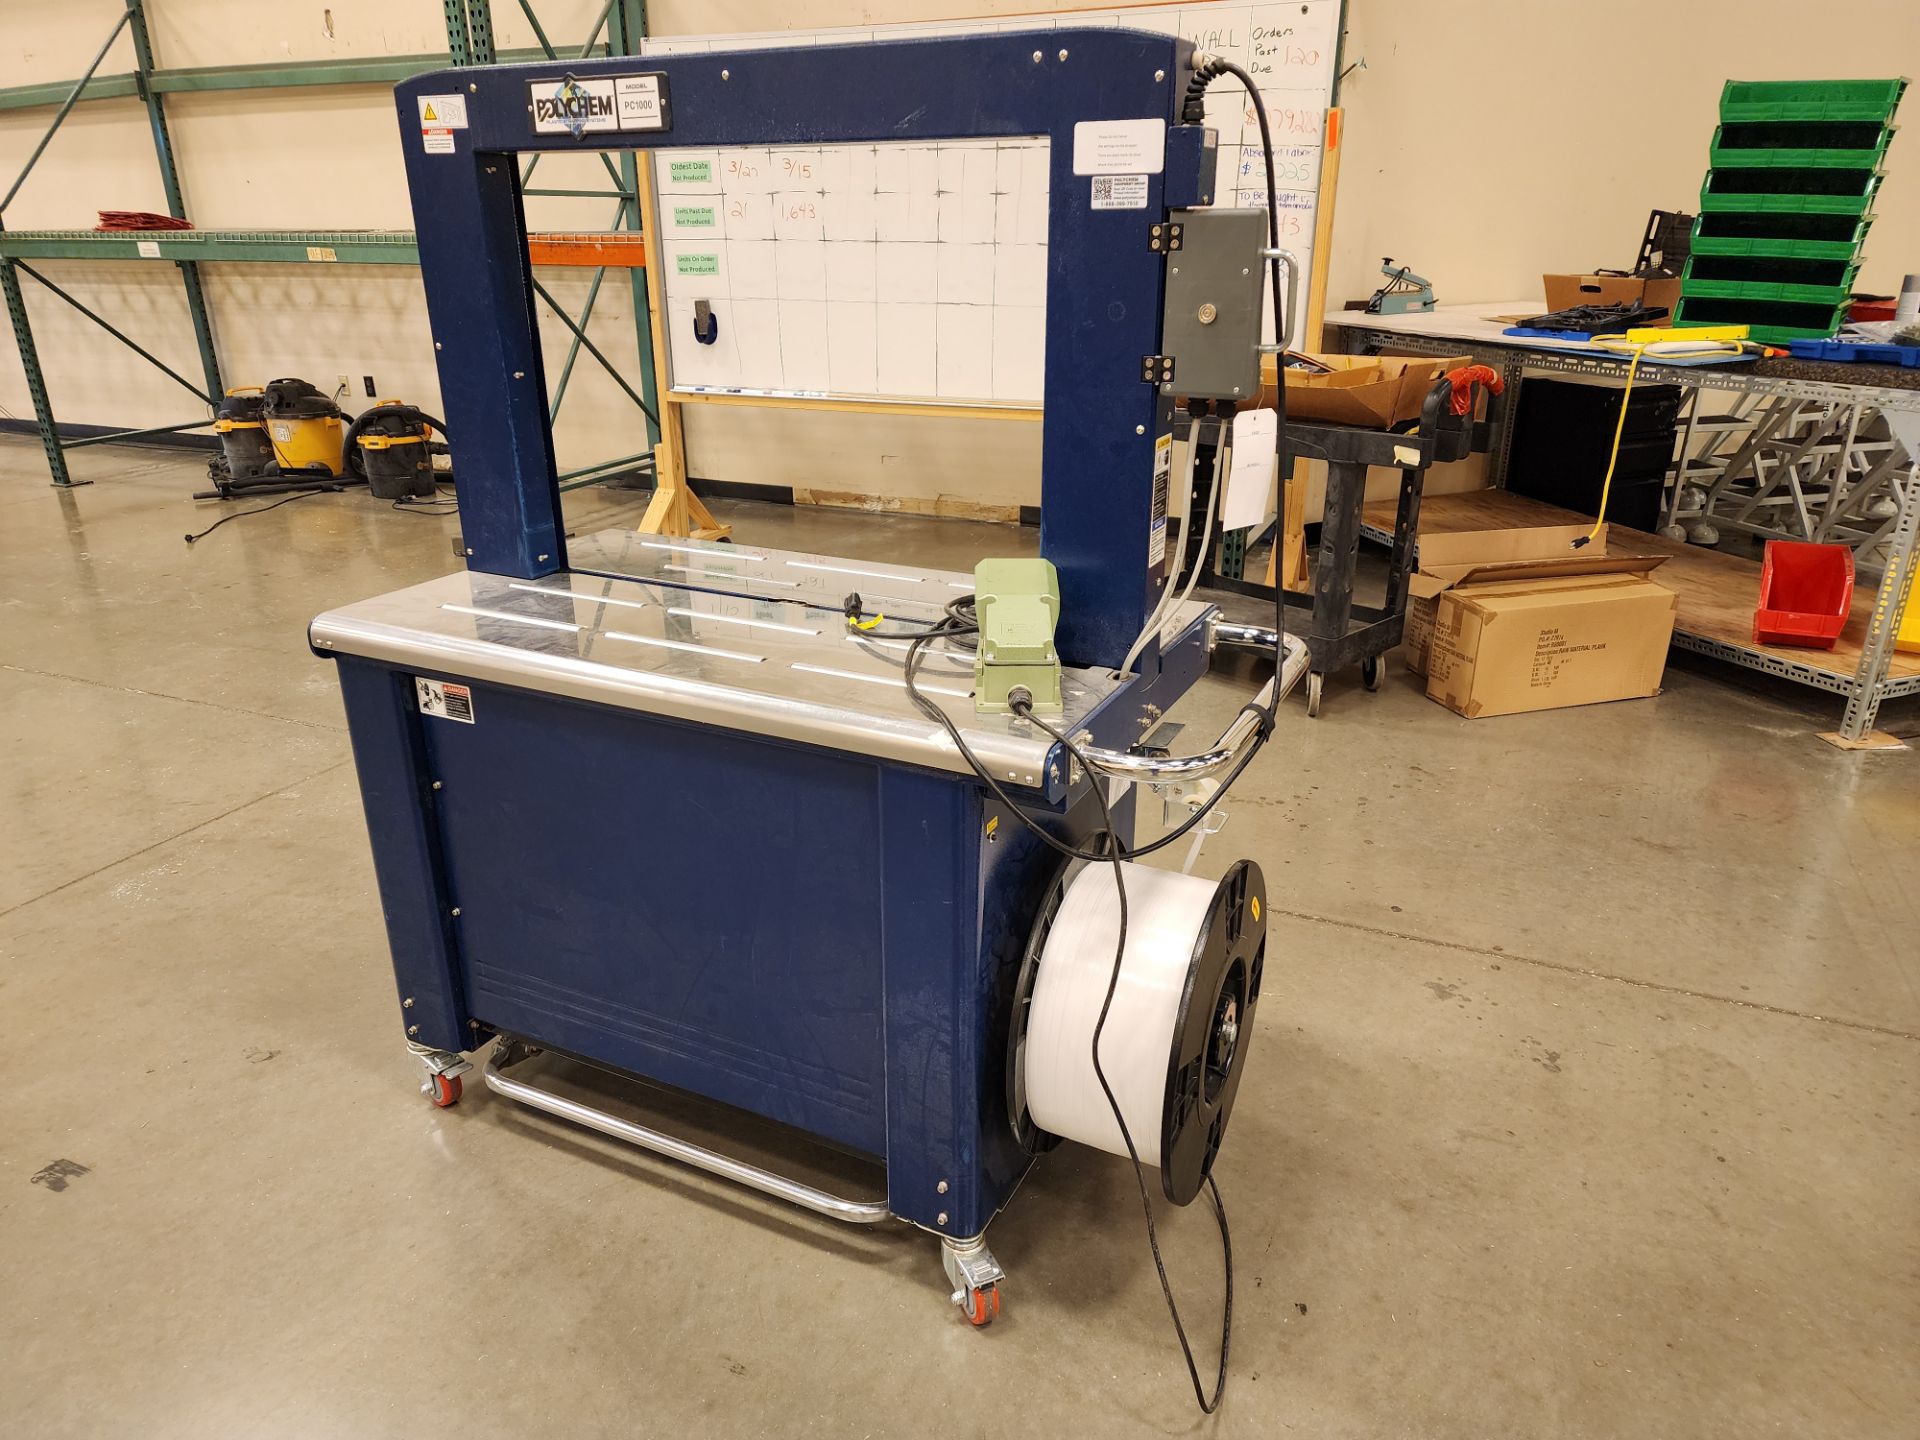 Polychem Model PC1000 Automatic Arch Strapping Machine, 88 Lb. Capacity, S/N 150143 (2020) - Image 4 of 5